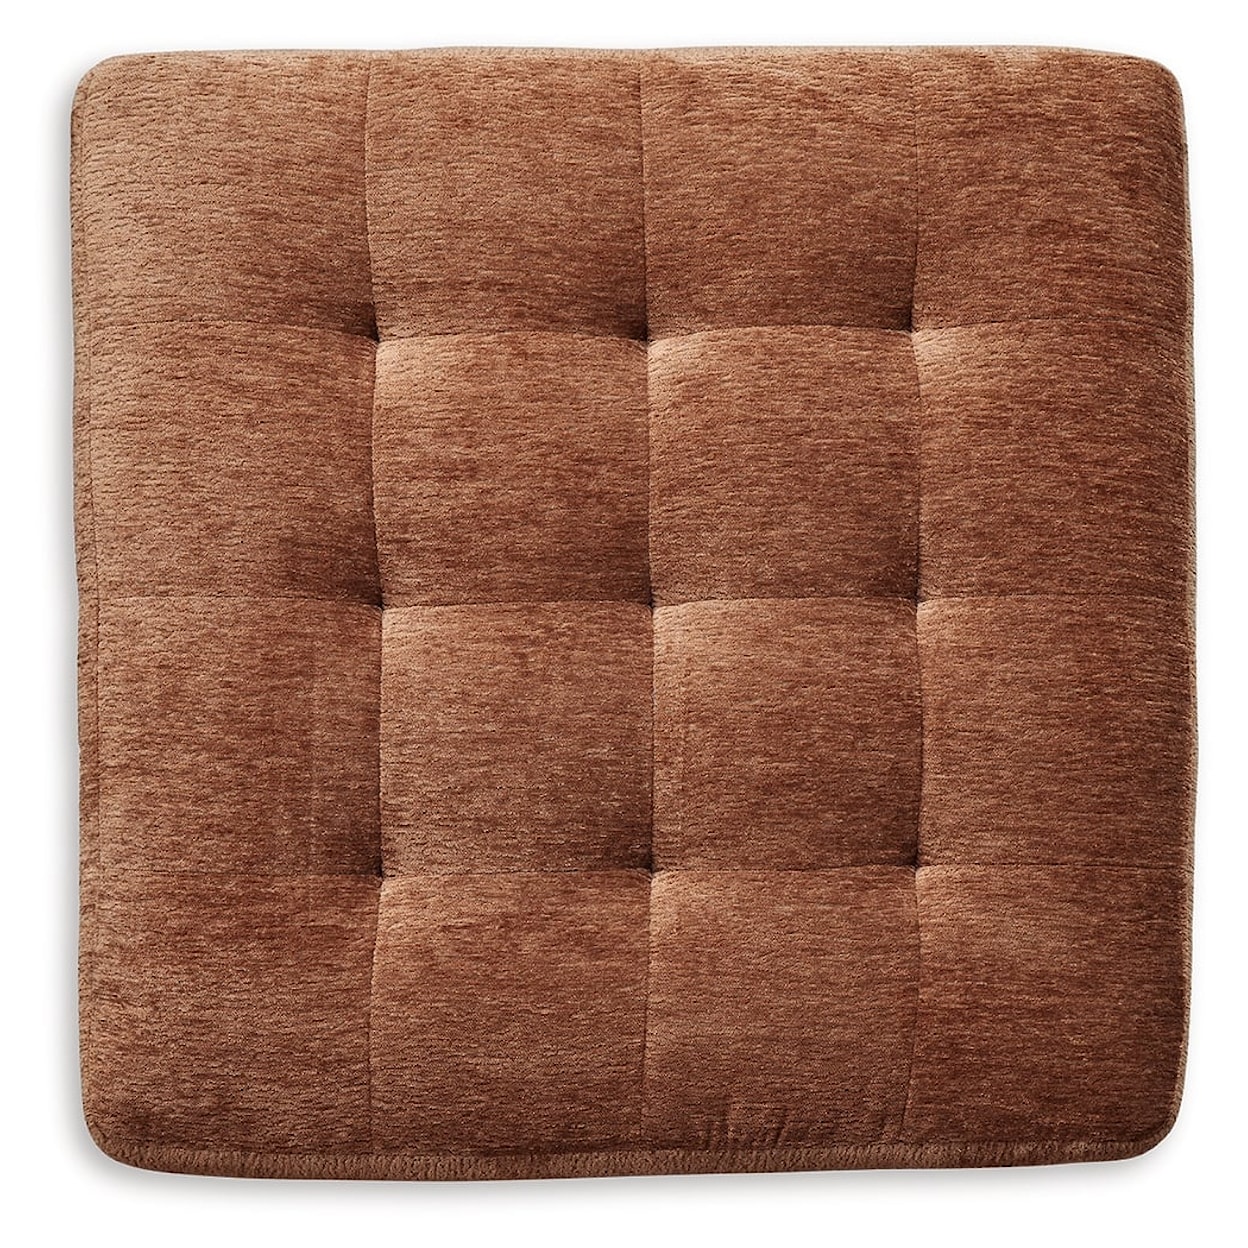 Michael Alan Select Laylabrook Oversized Accent Ottoman